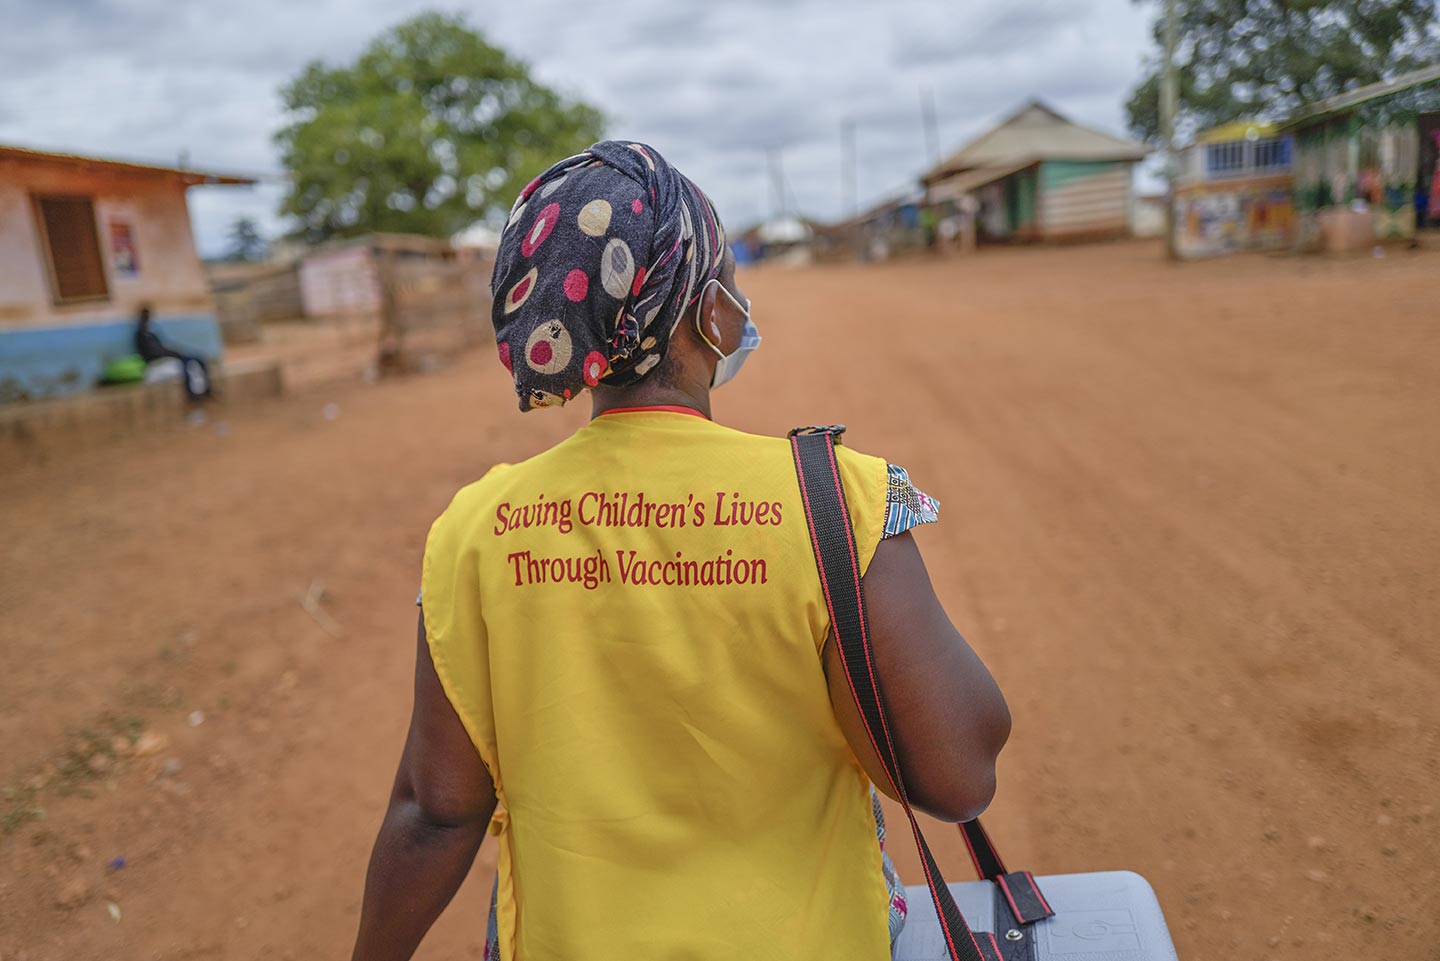 A volunteer walks through the Kotokuom community in the Ashanti Region to reach children who have not yet received the polio vaccine on 11 September 2020. ©UNICEF/ACQUAH